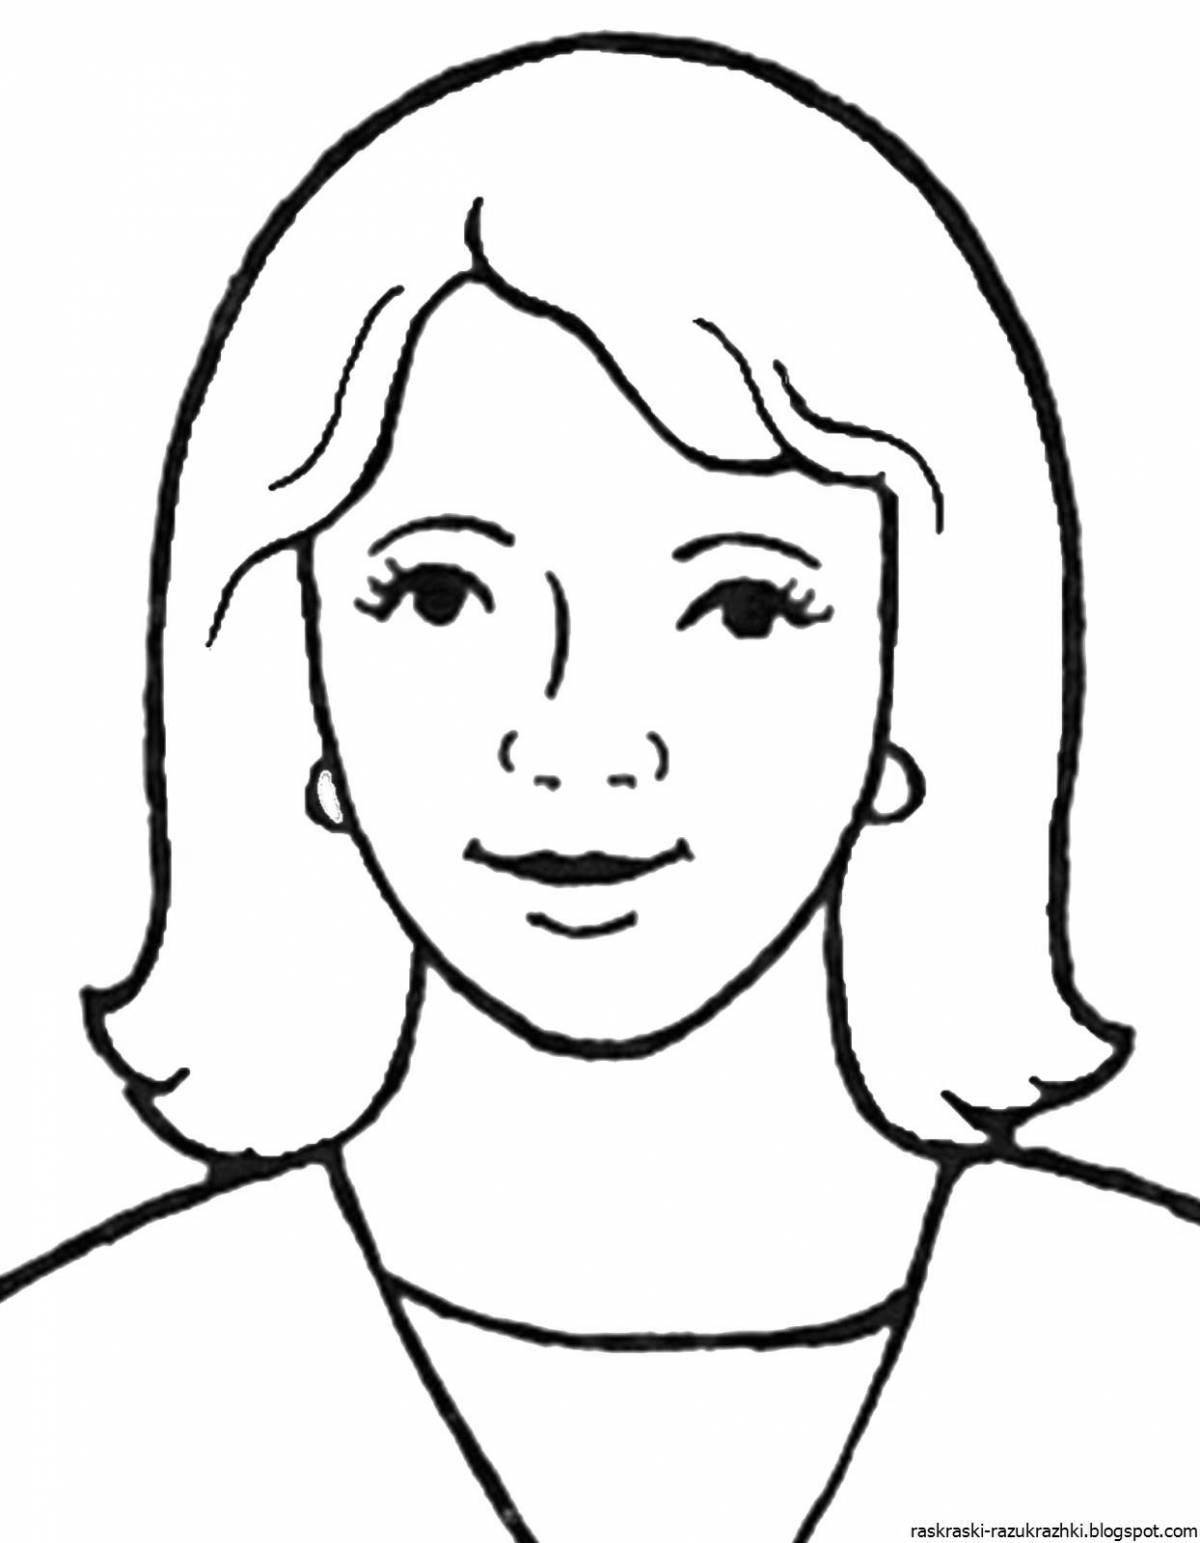 Glowing face coloring page